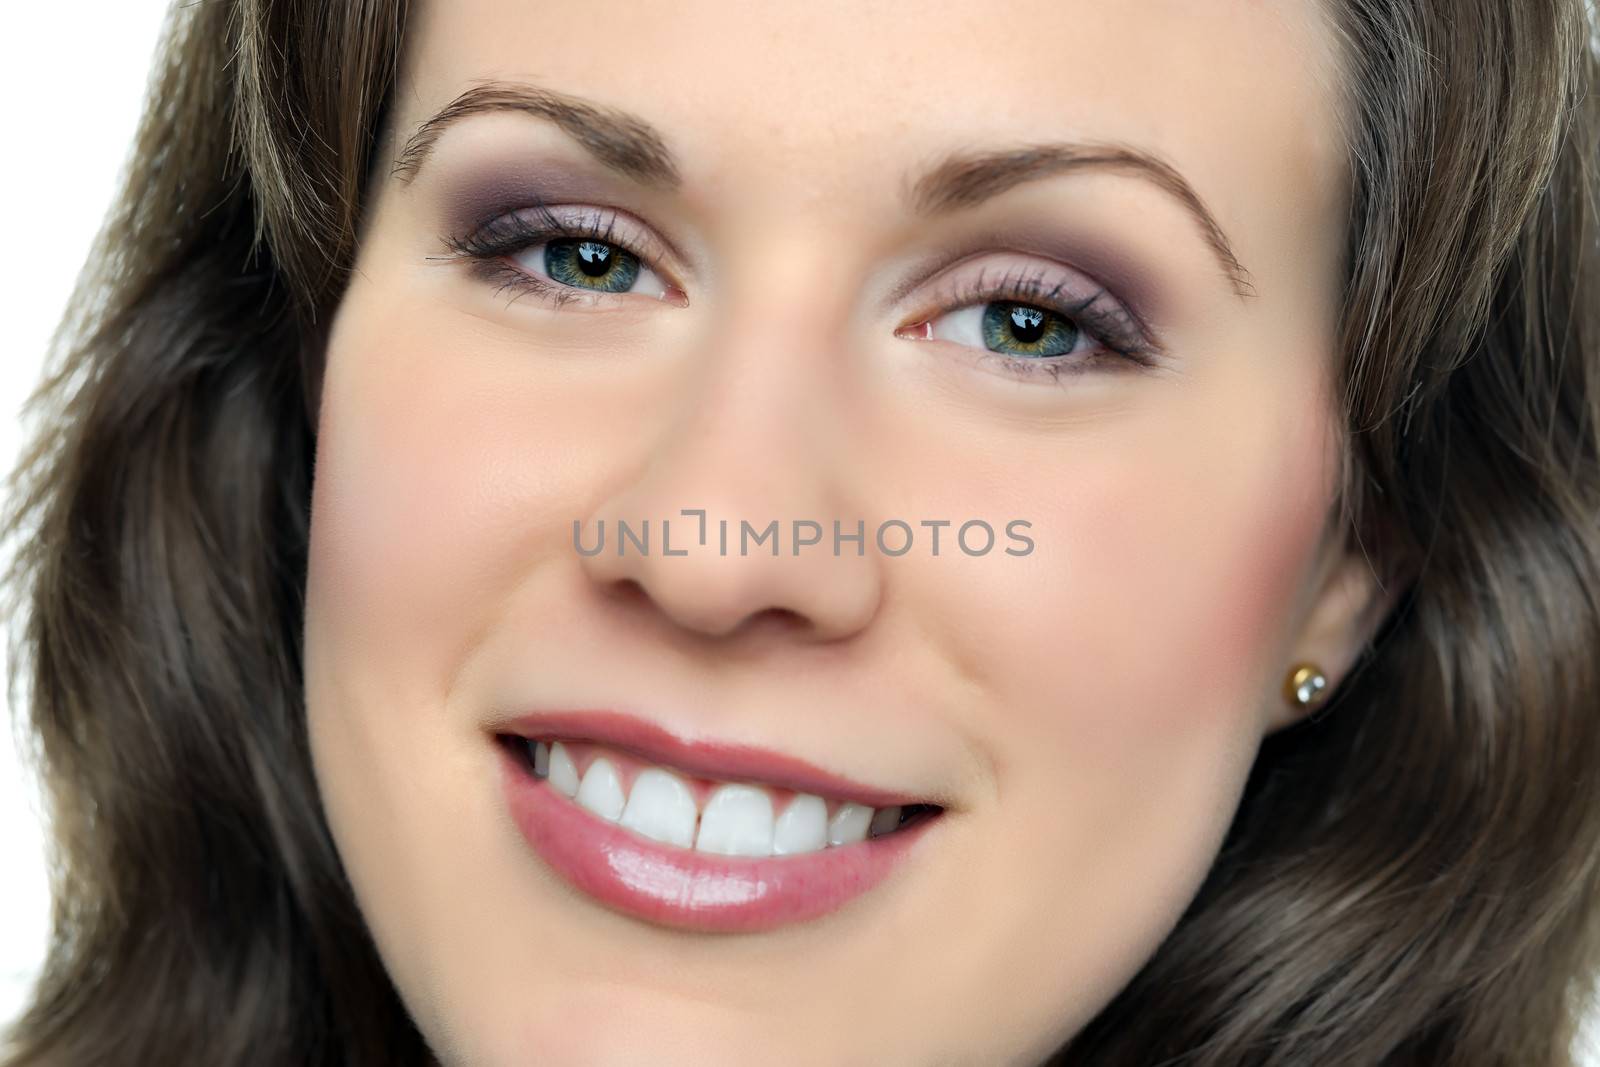 Face of a brunette smiling woman